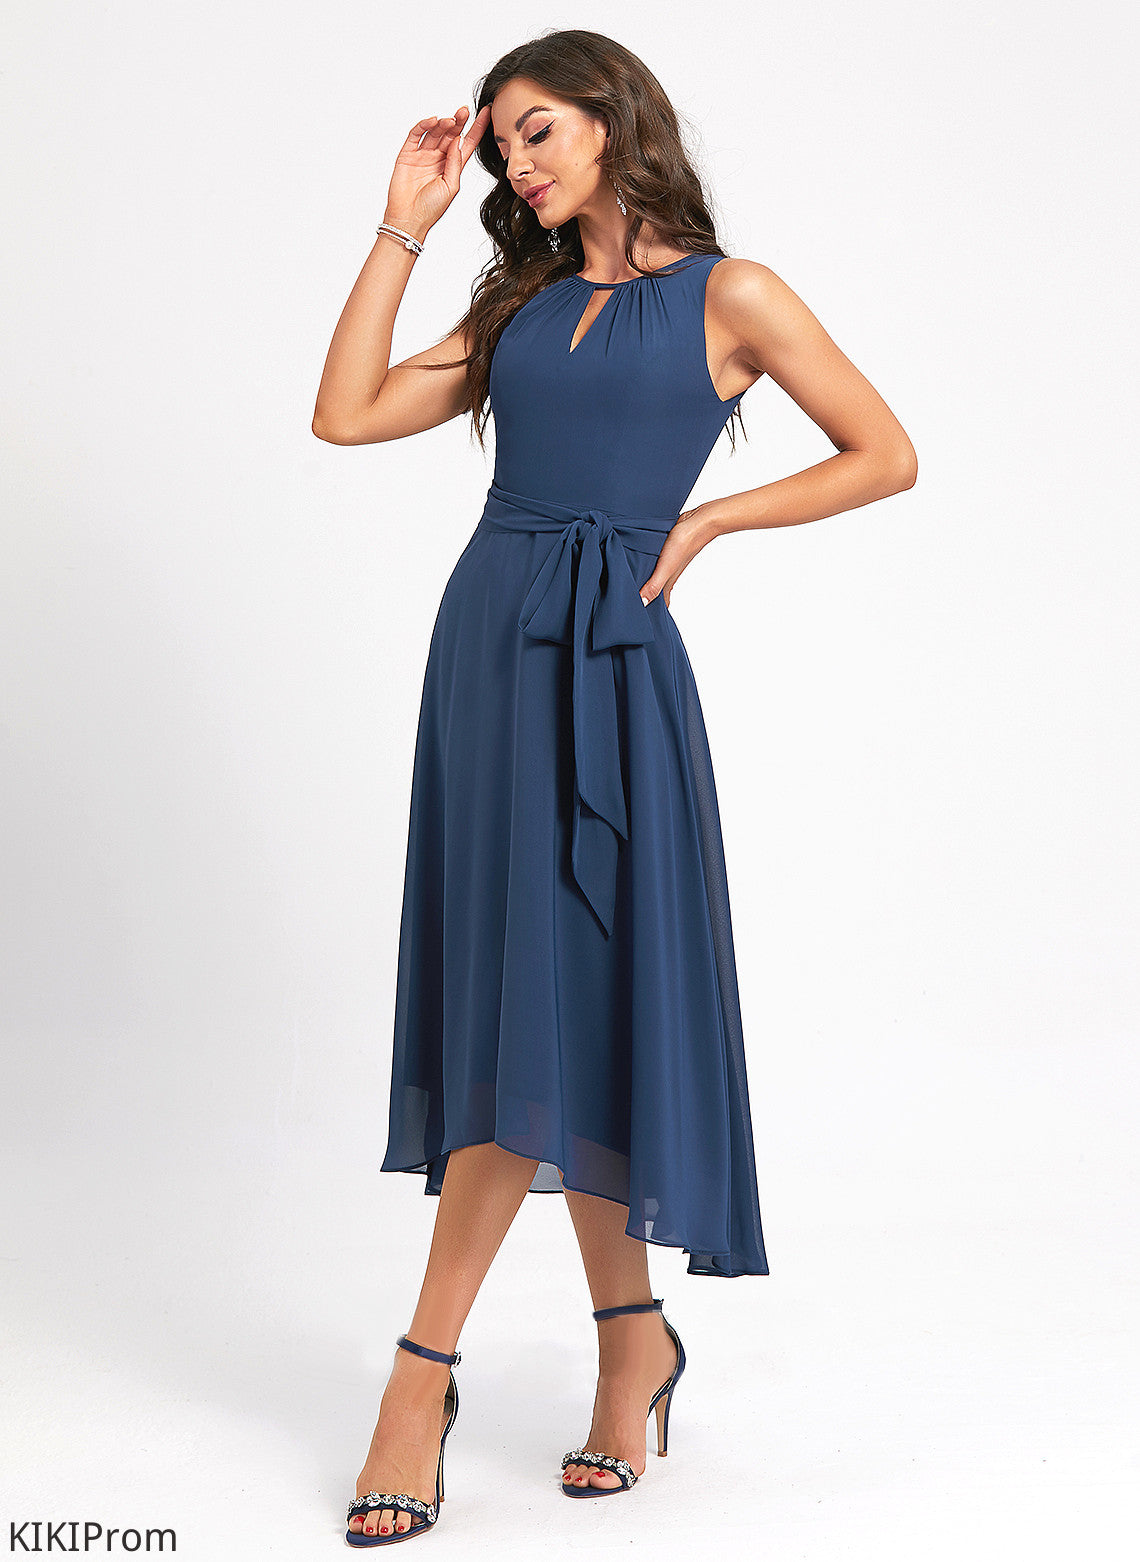 A-Line Liliana With Sash Neck Scoop Chiffon Cocktail Dresses Cocktail Asymmetrical Dress